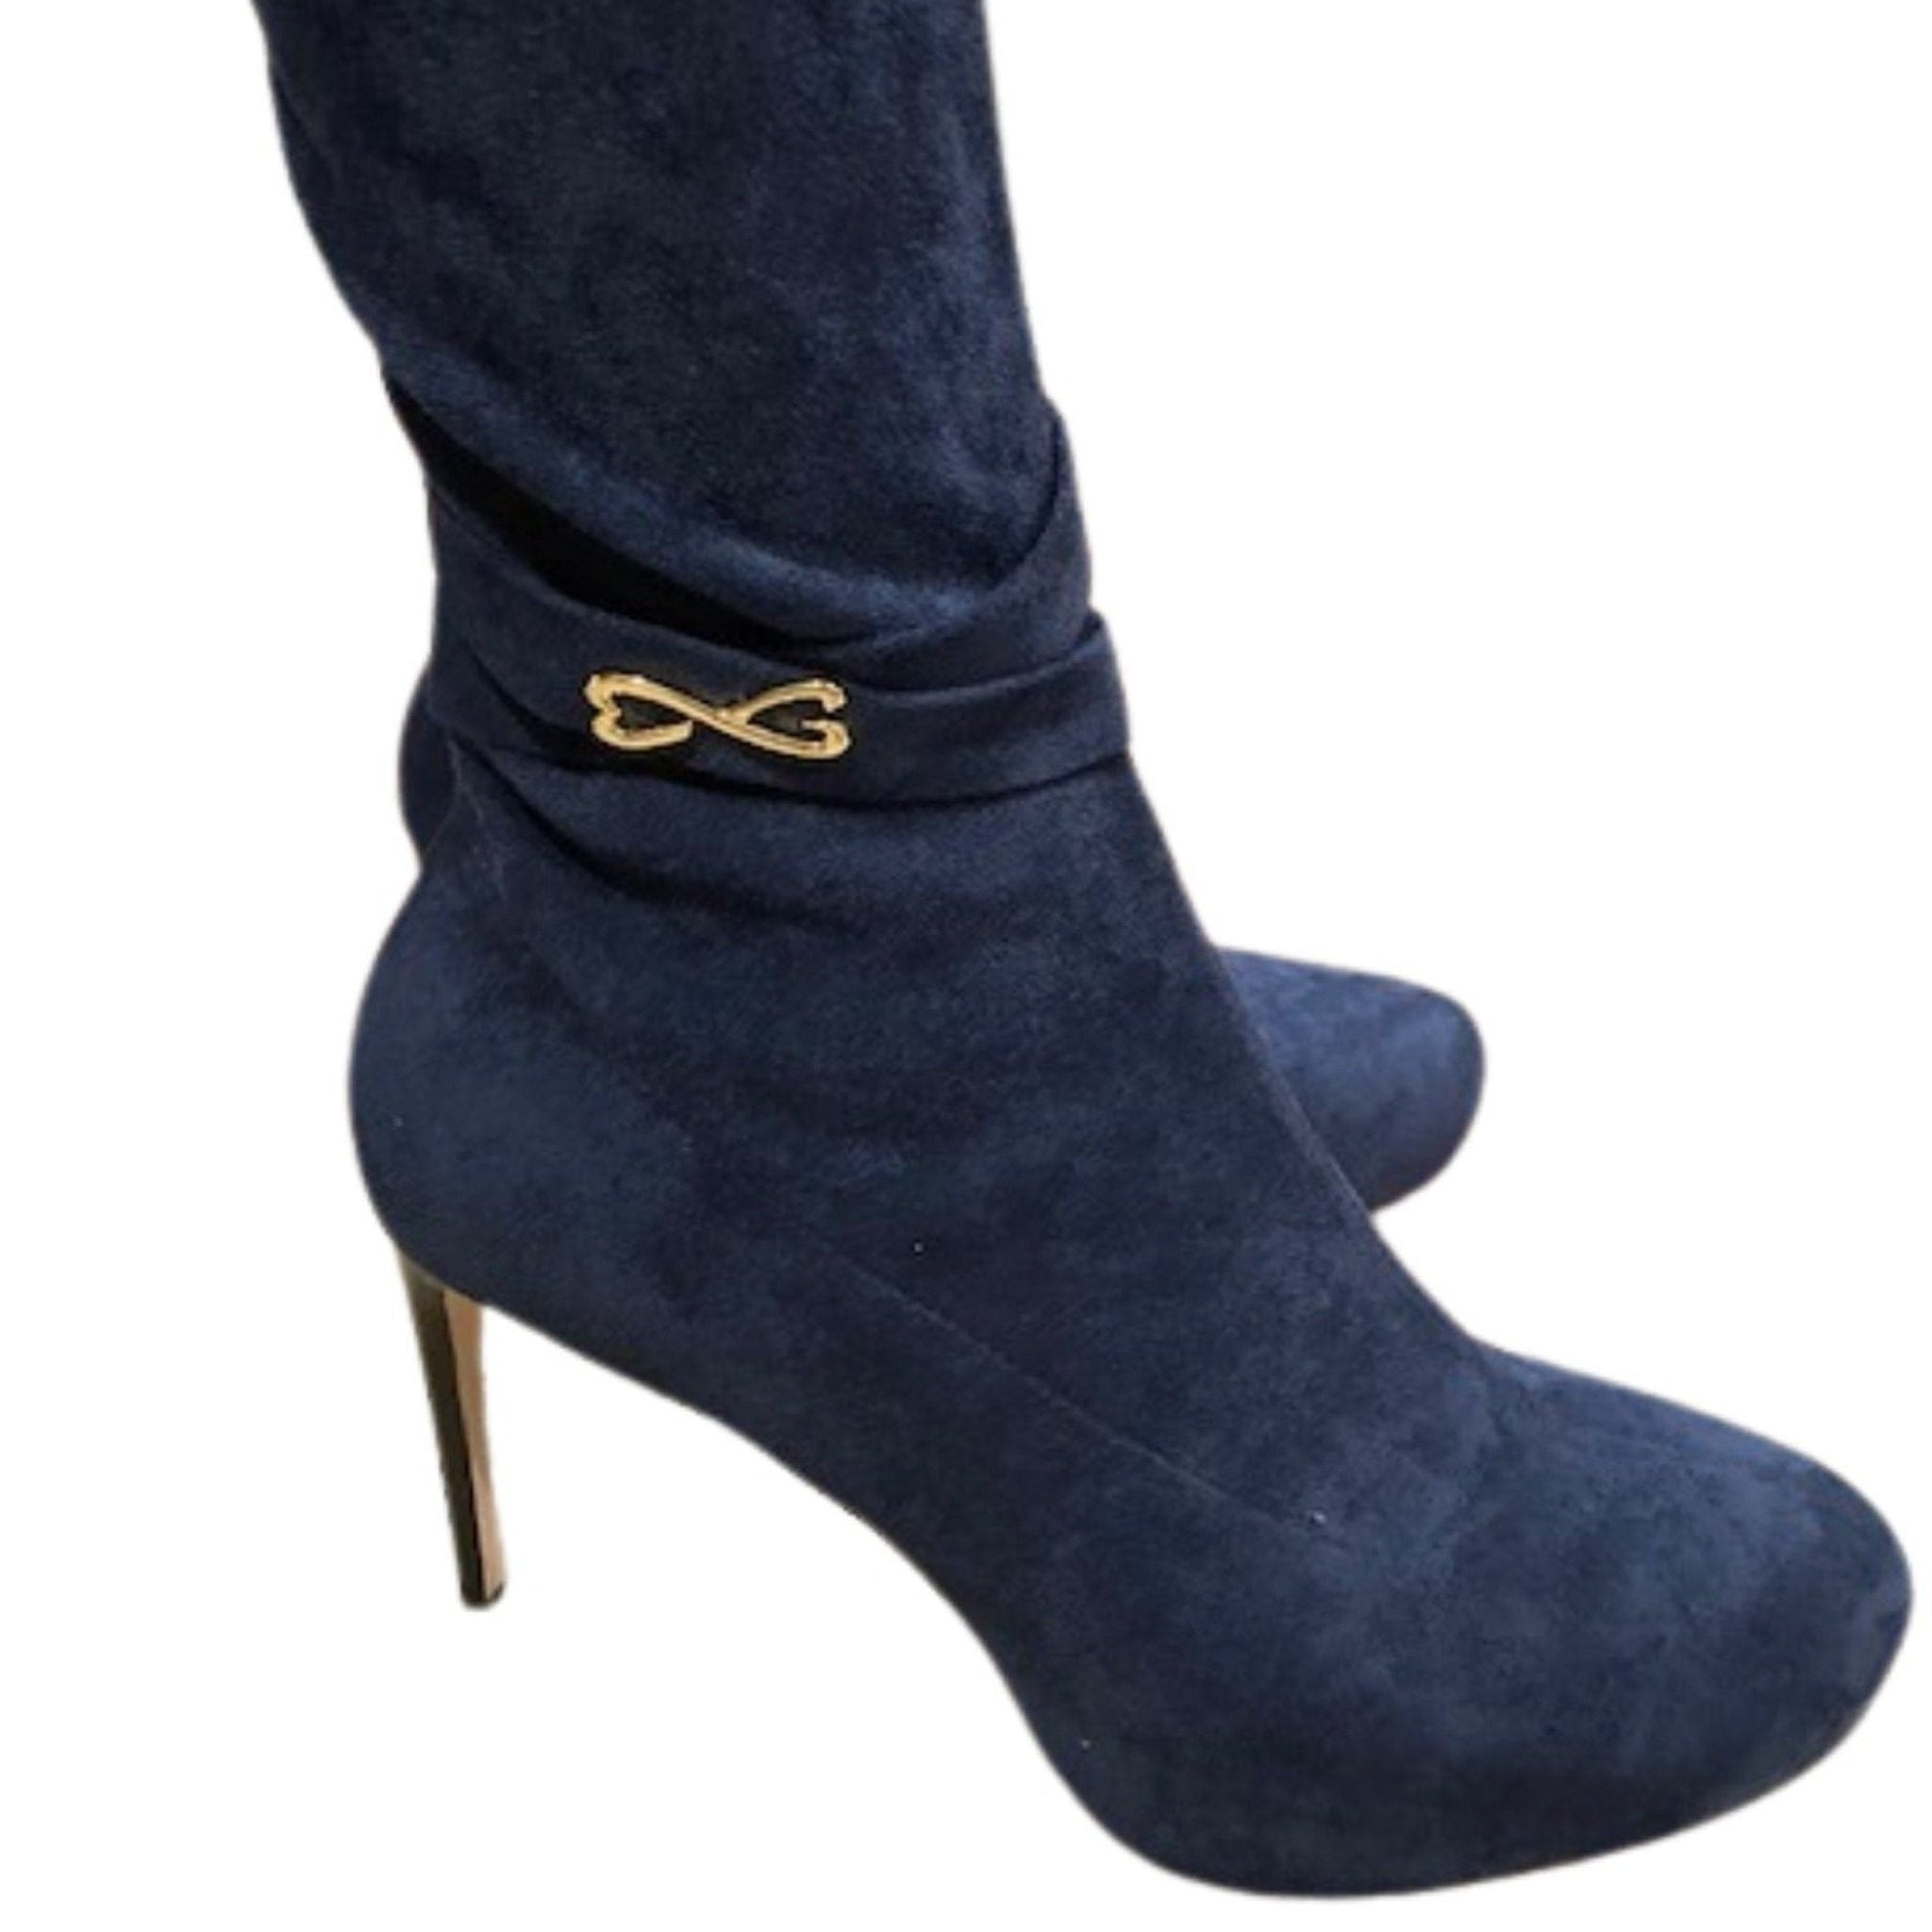 blue suede boot with ankle strap and hardware